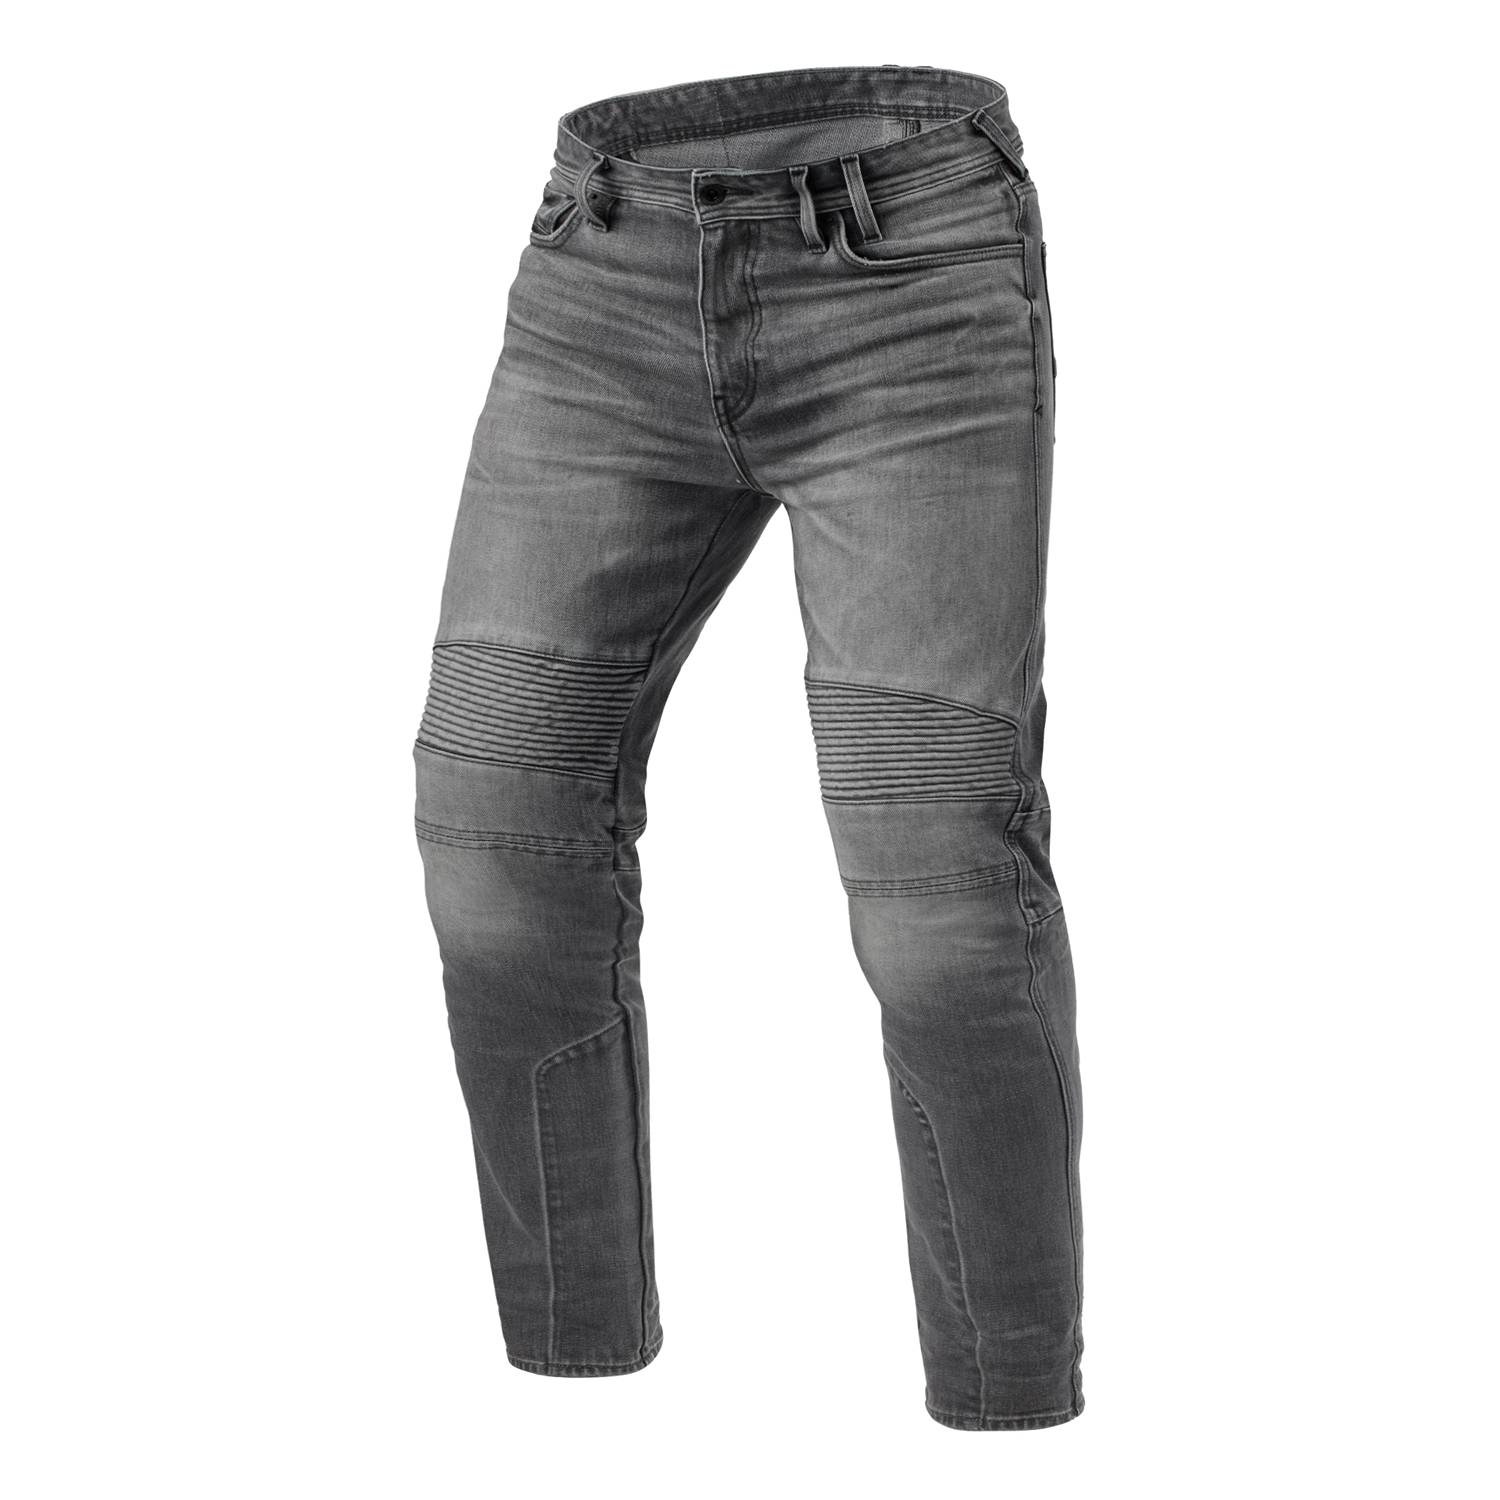 Image of REV'IT! Jeans Moto 2 TF Medium Grey Used L36 Motorcycle Jeans Size L36/W32 ID 8700001375665